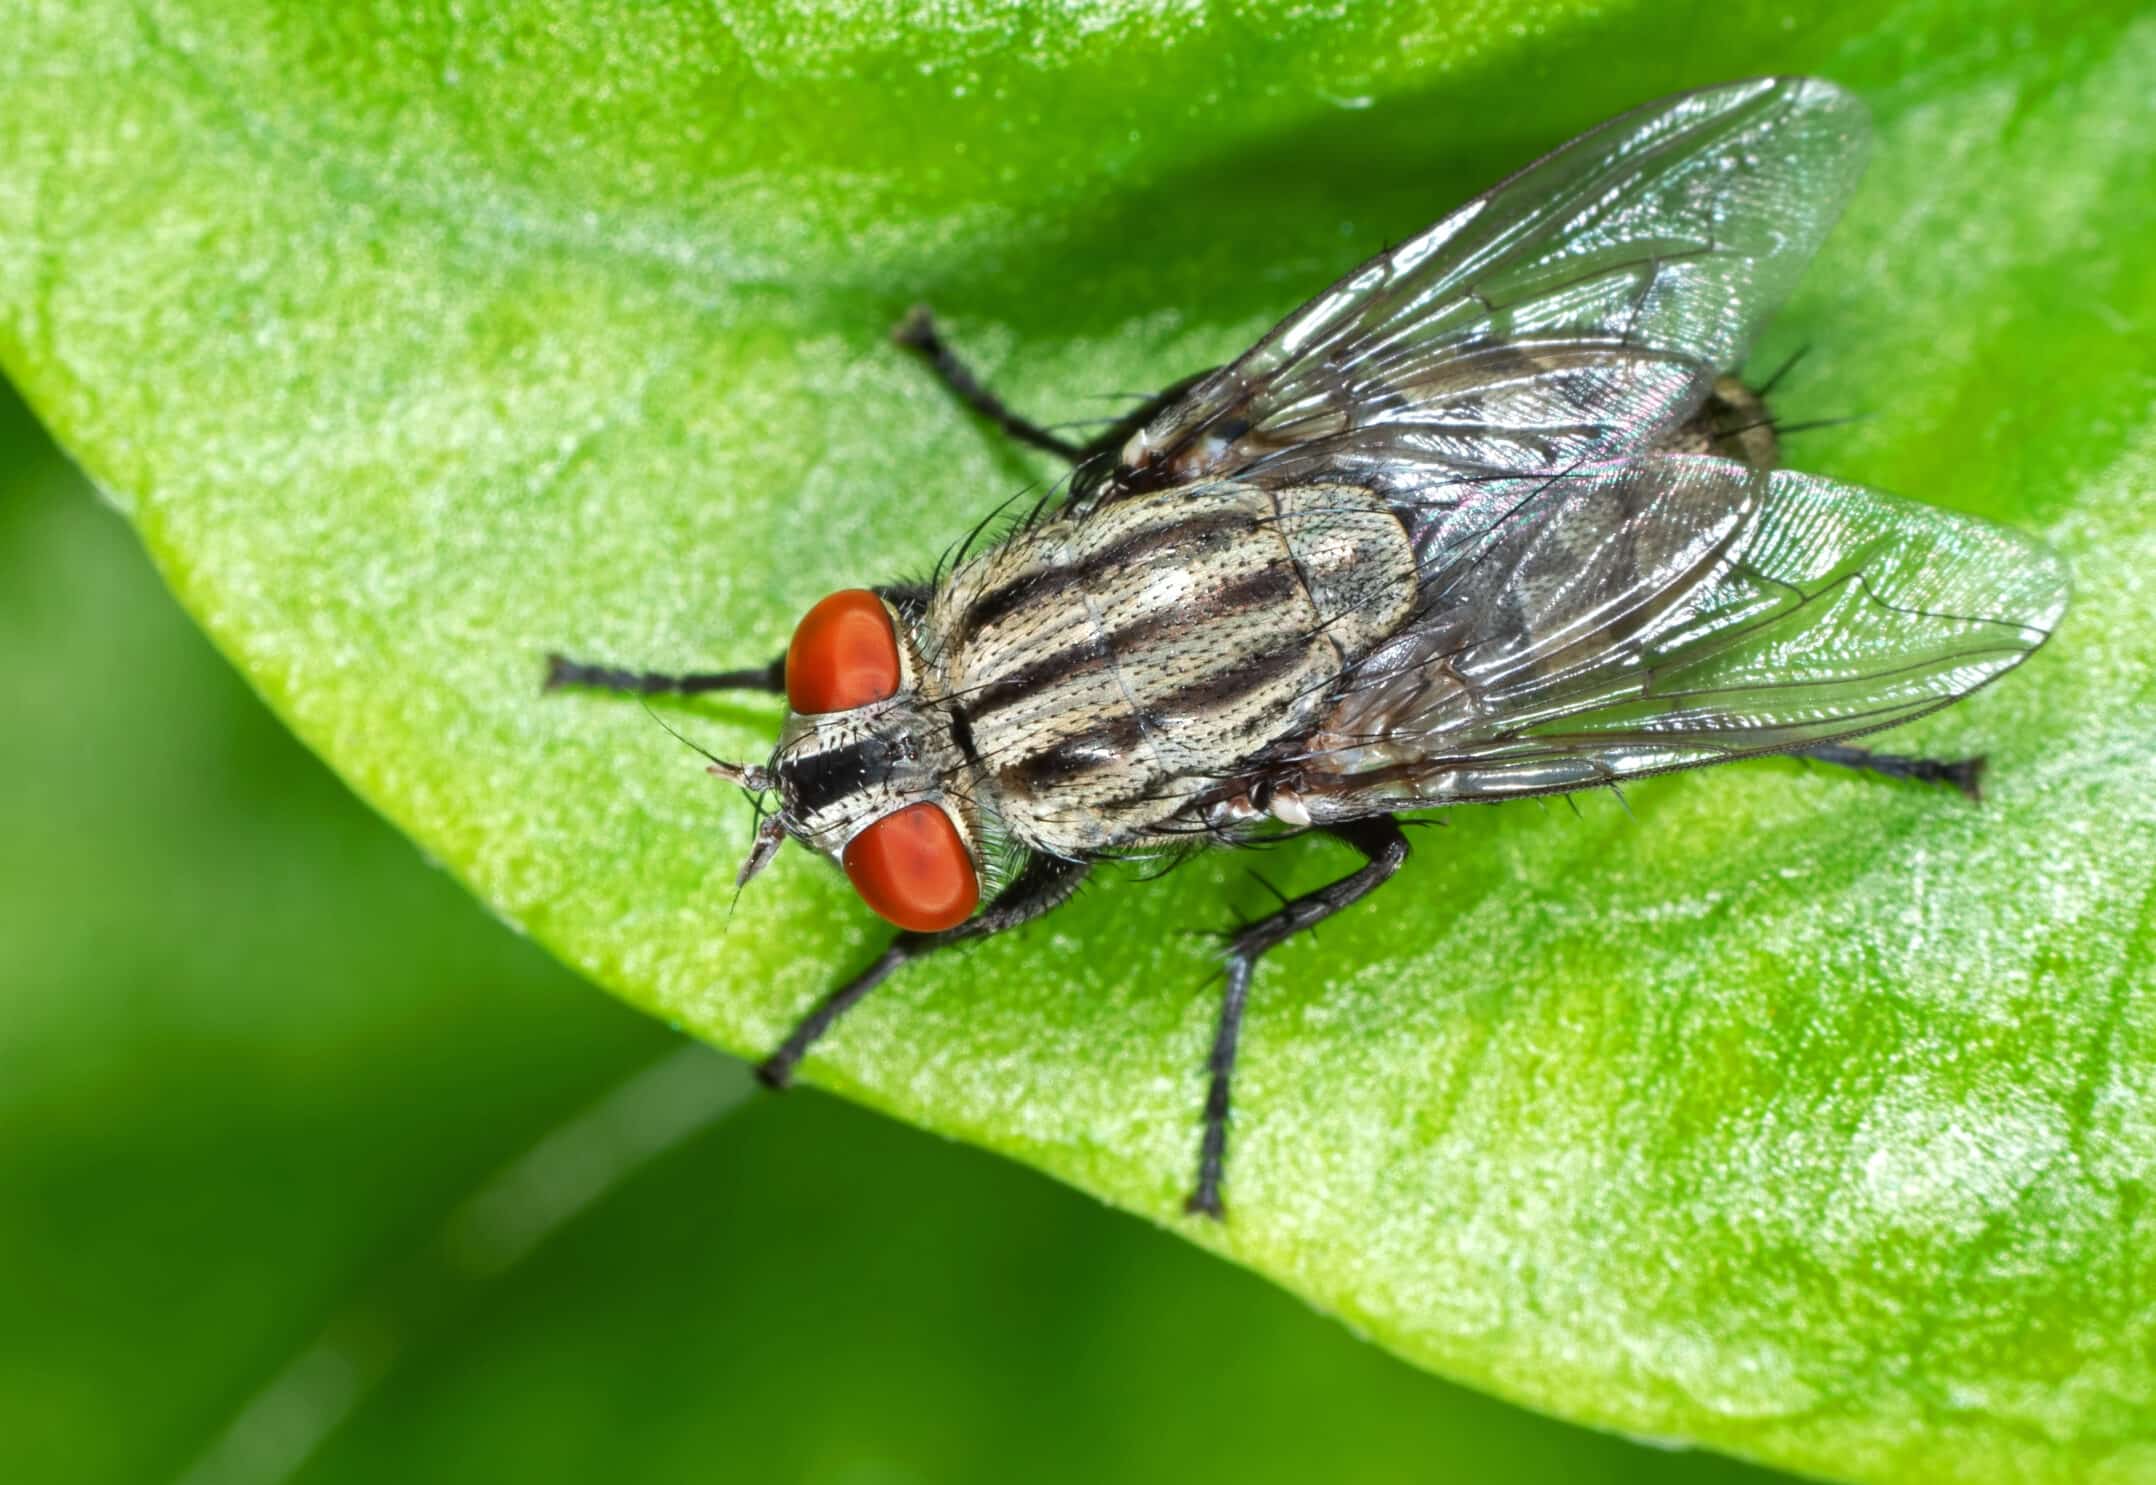 Size of fly's eyes and nose reflect its behavior during mating and